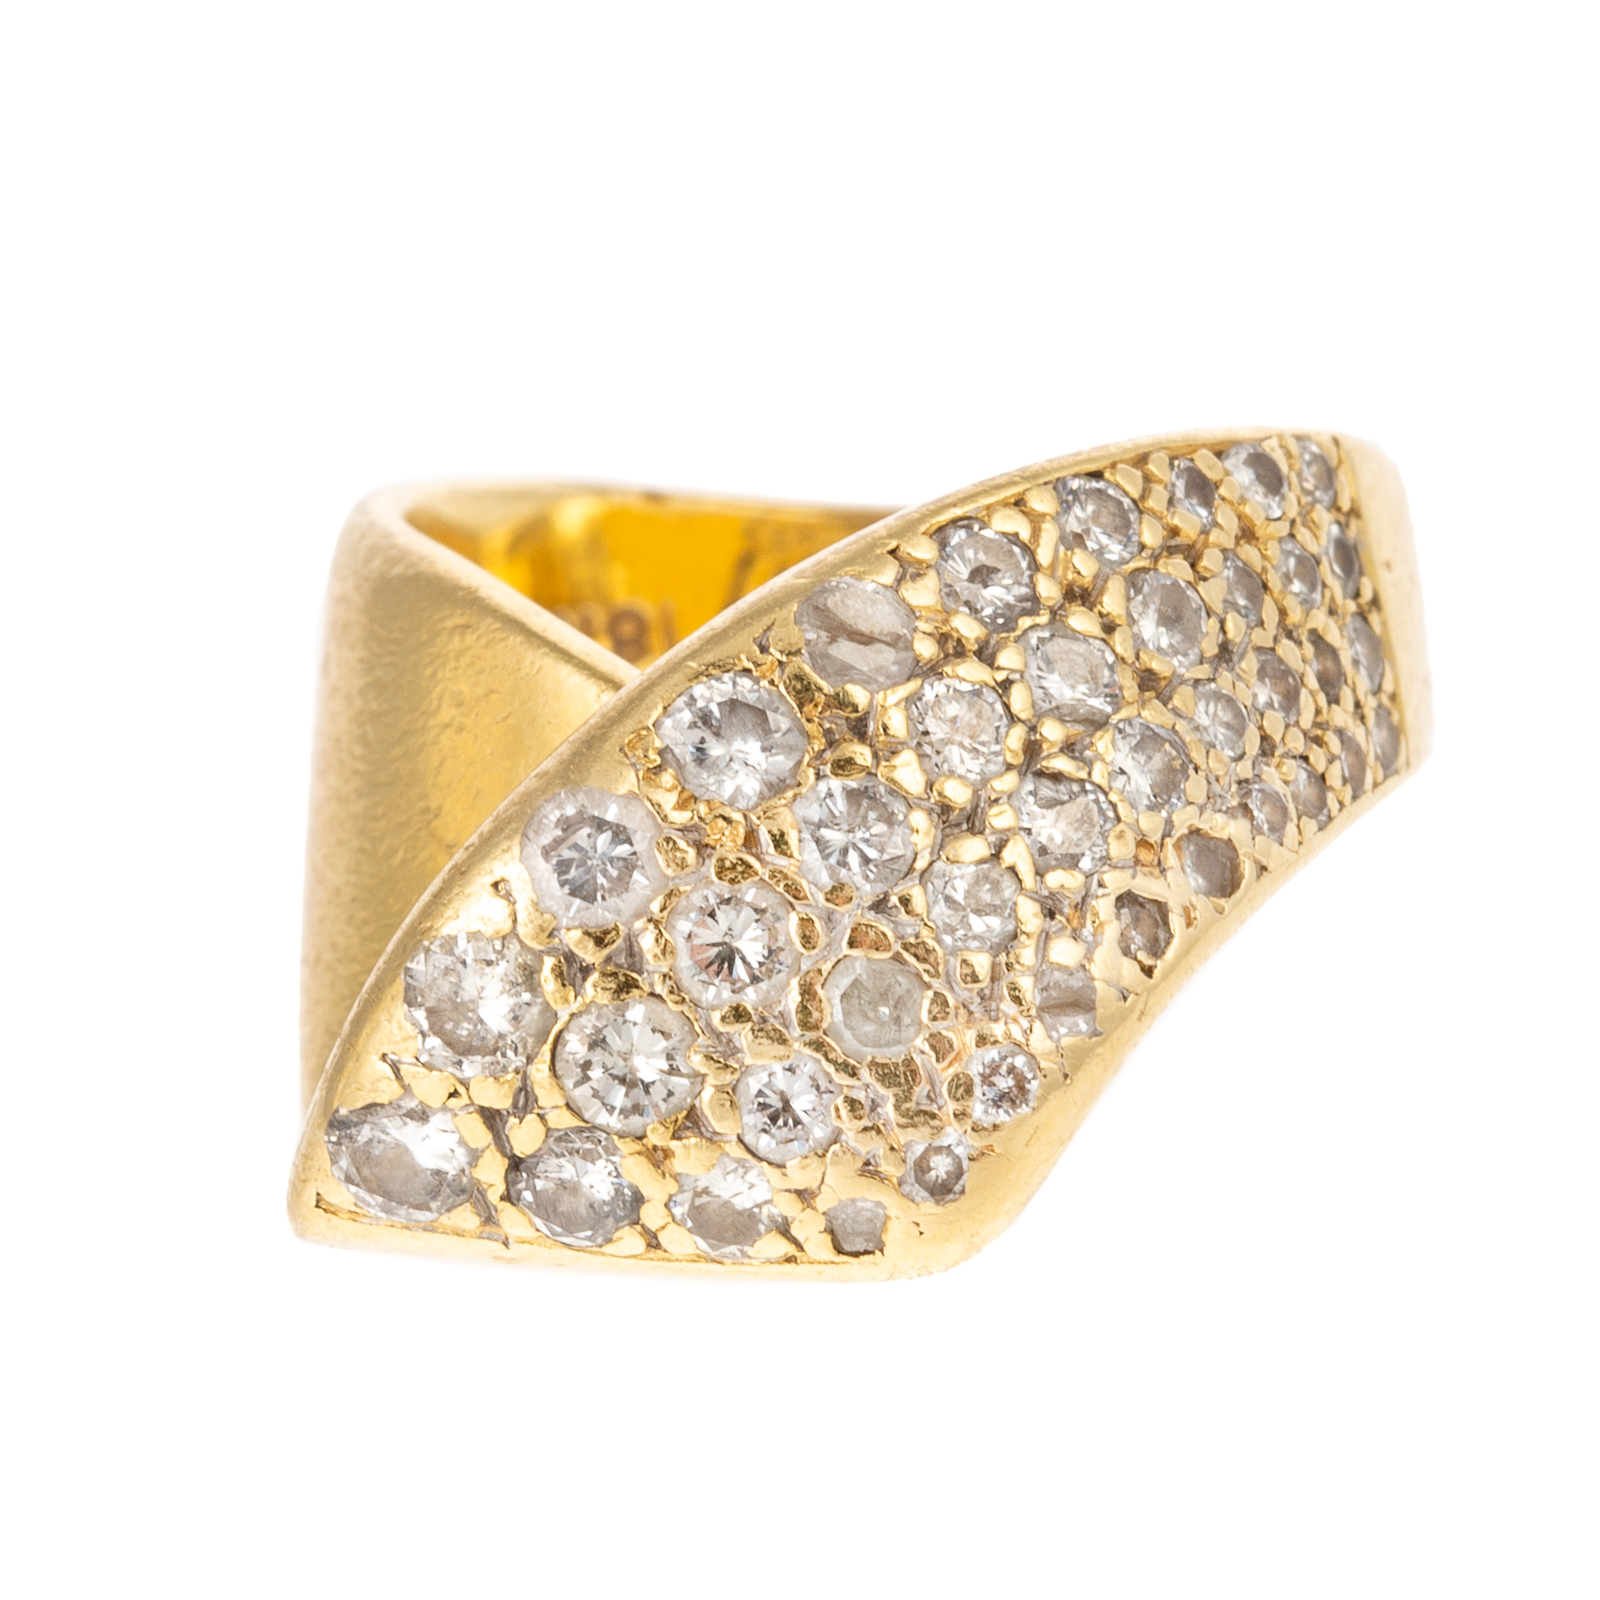 A PAVE DIAMOND RIBBON RING IN 18K